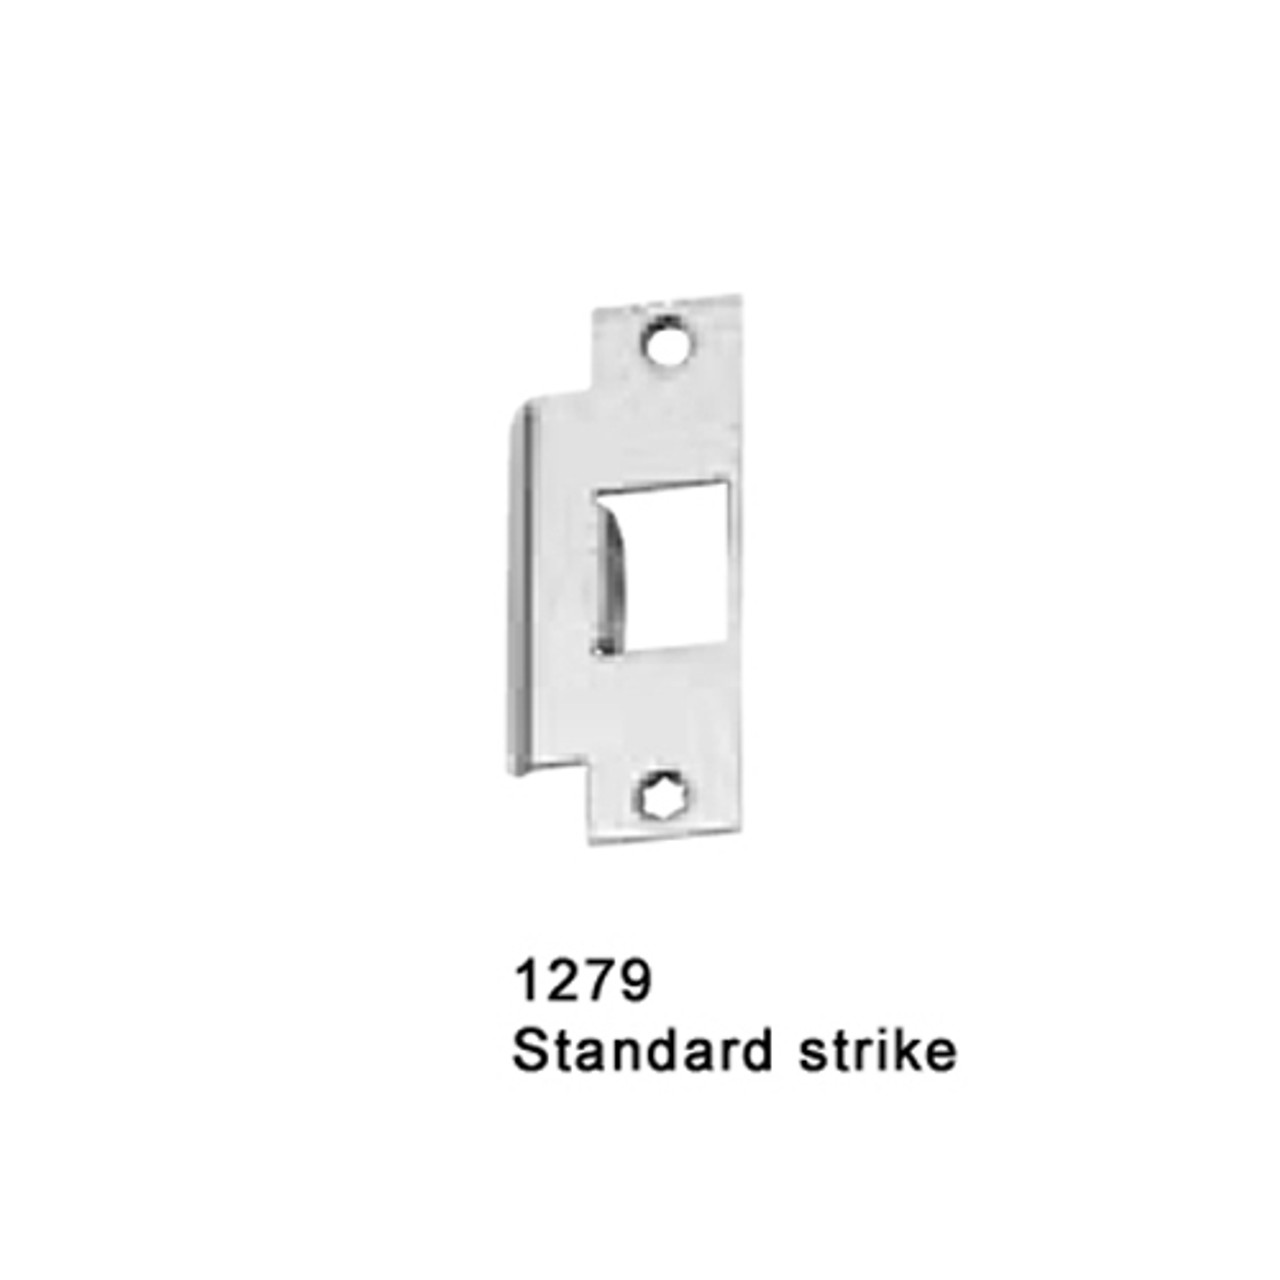 CD25-M-EO-US26-4-RHR Falcon 25 Series Exit Only Mortise Lock Devices in Polished Chrome